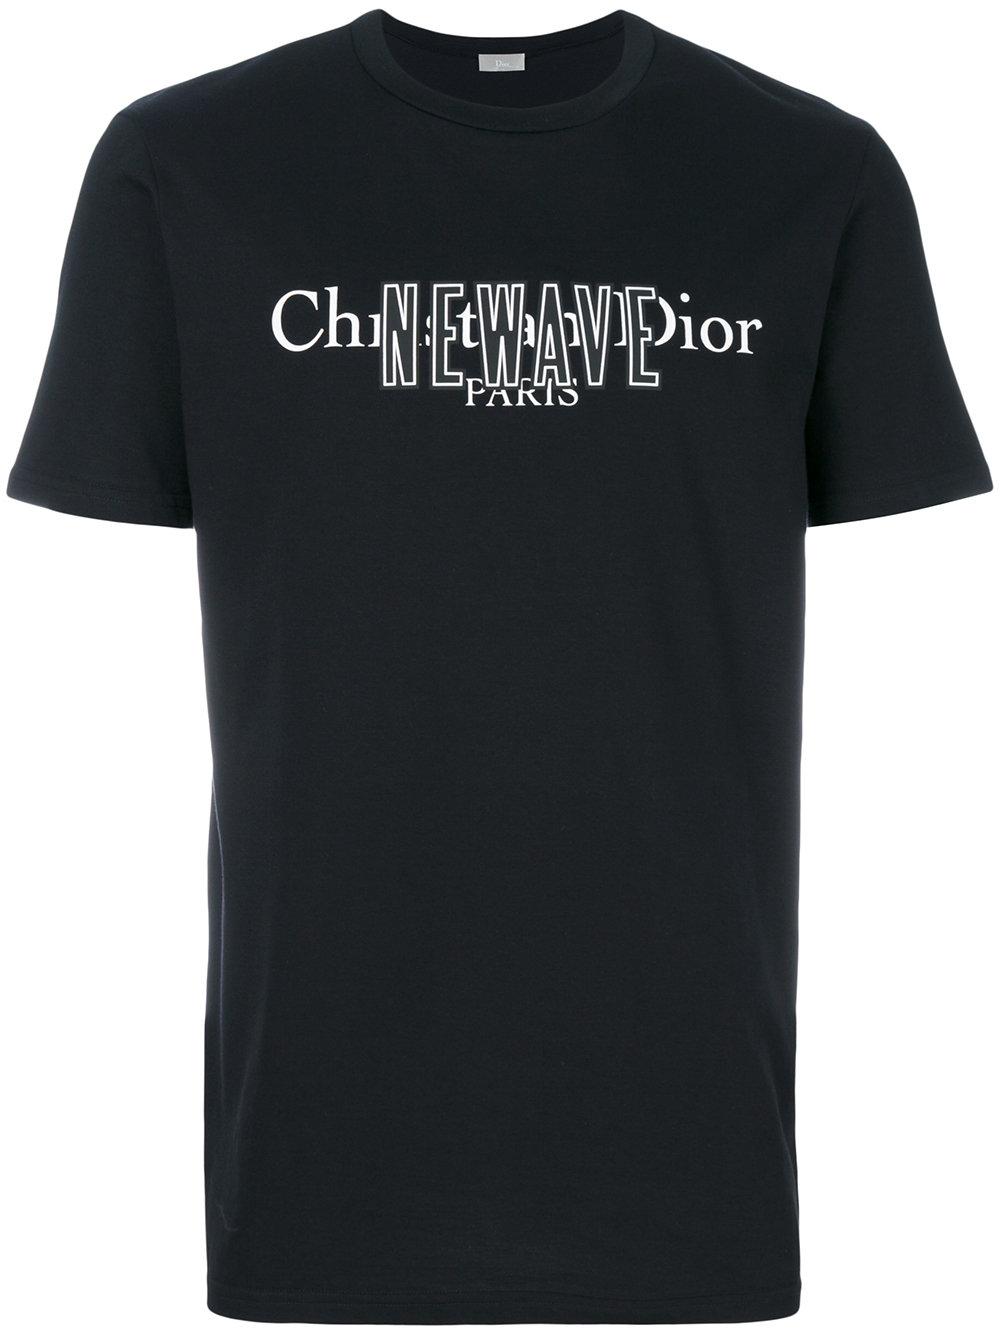 Dior Homme Cotton New Wave T-shirt in Black for Men - Lyst